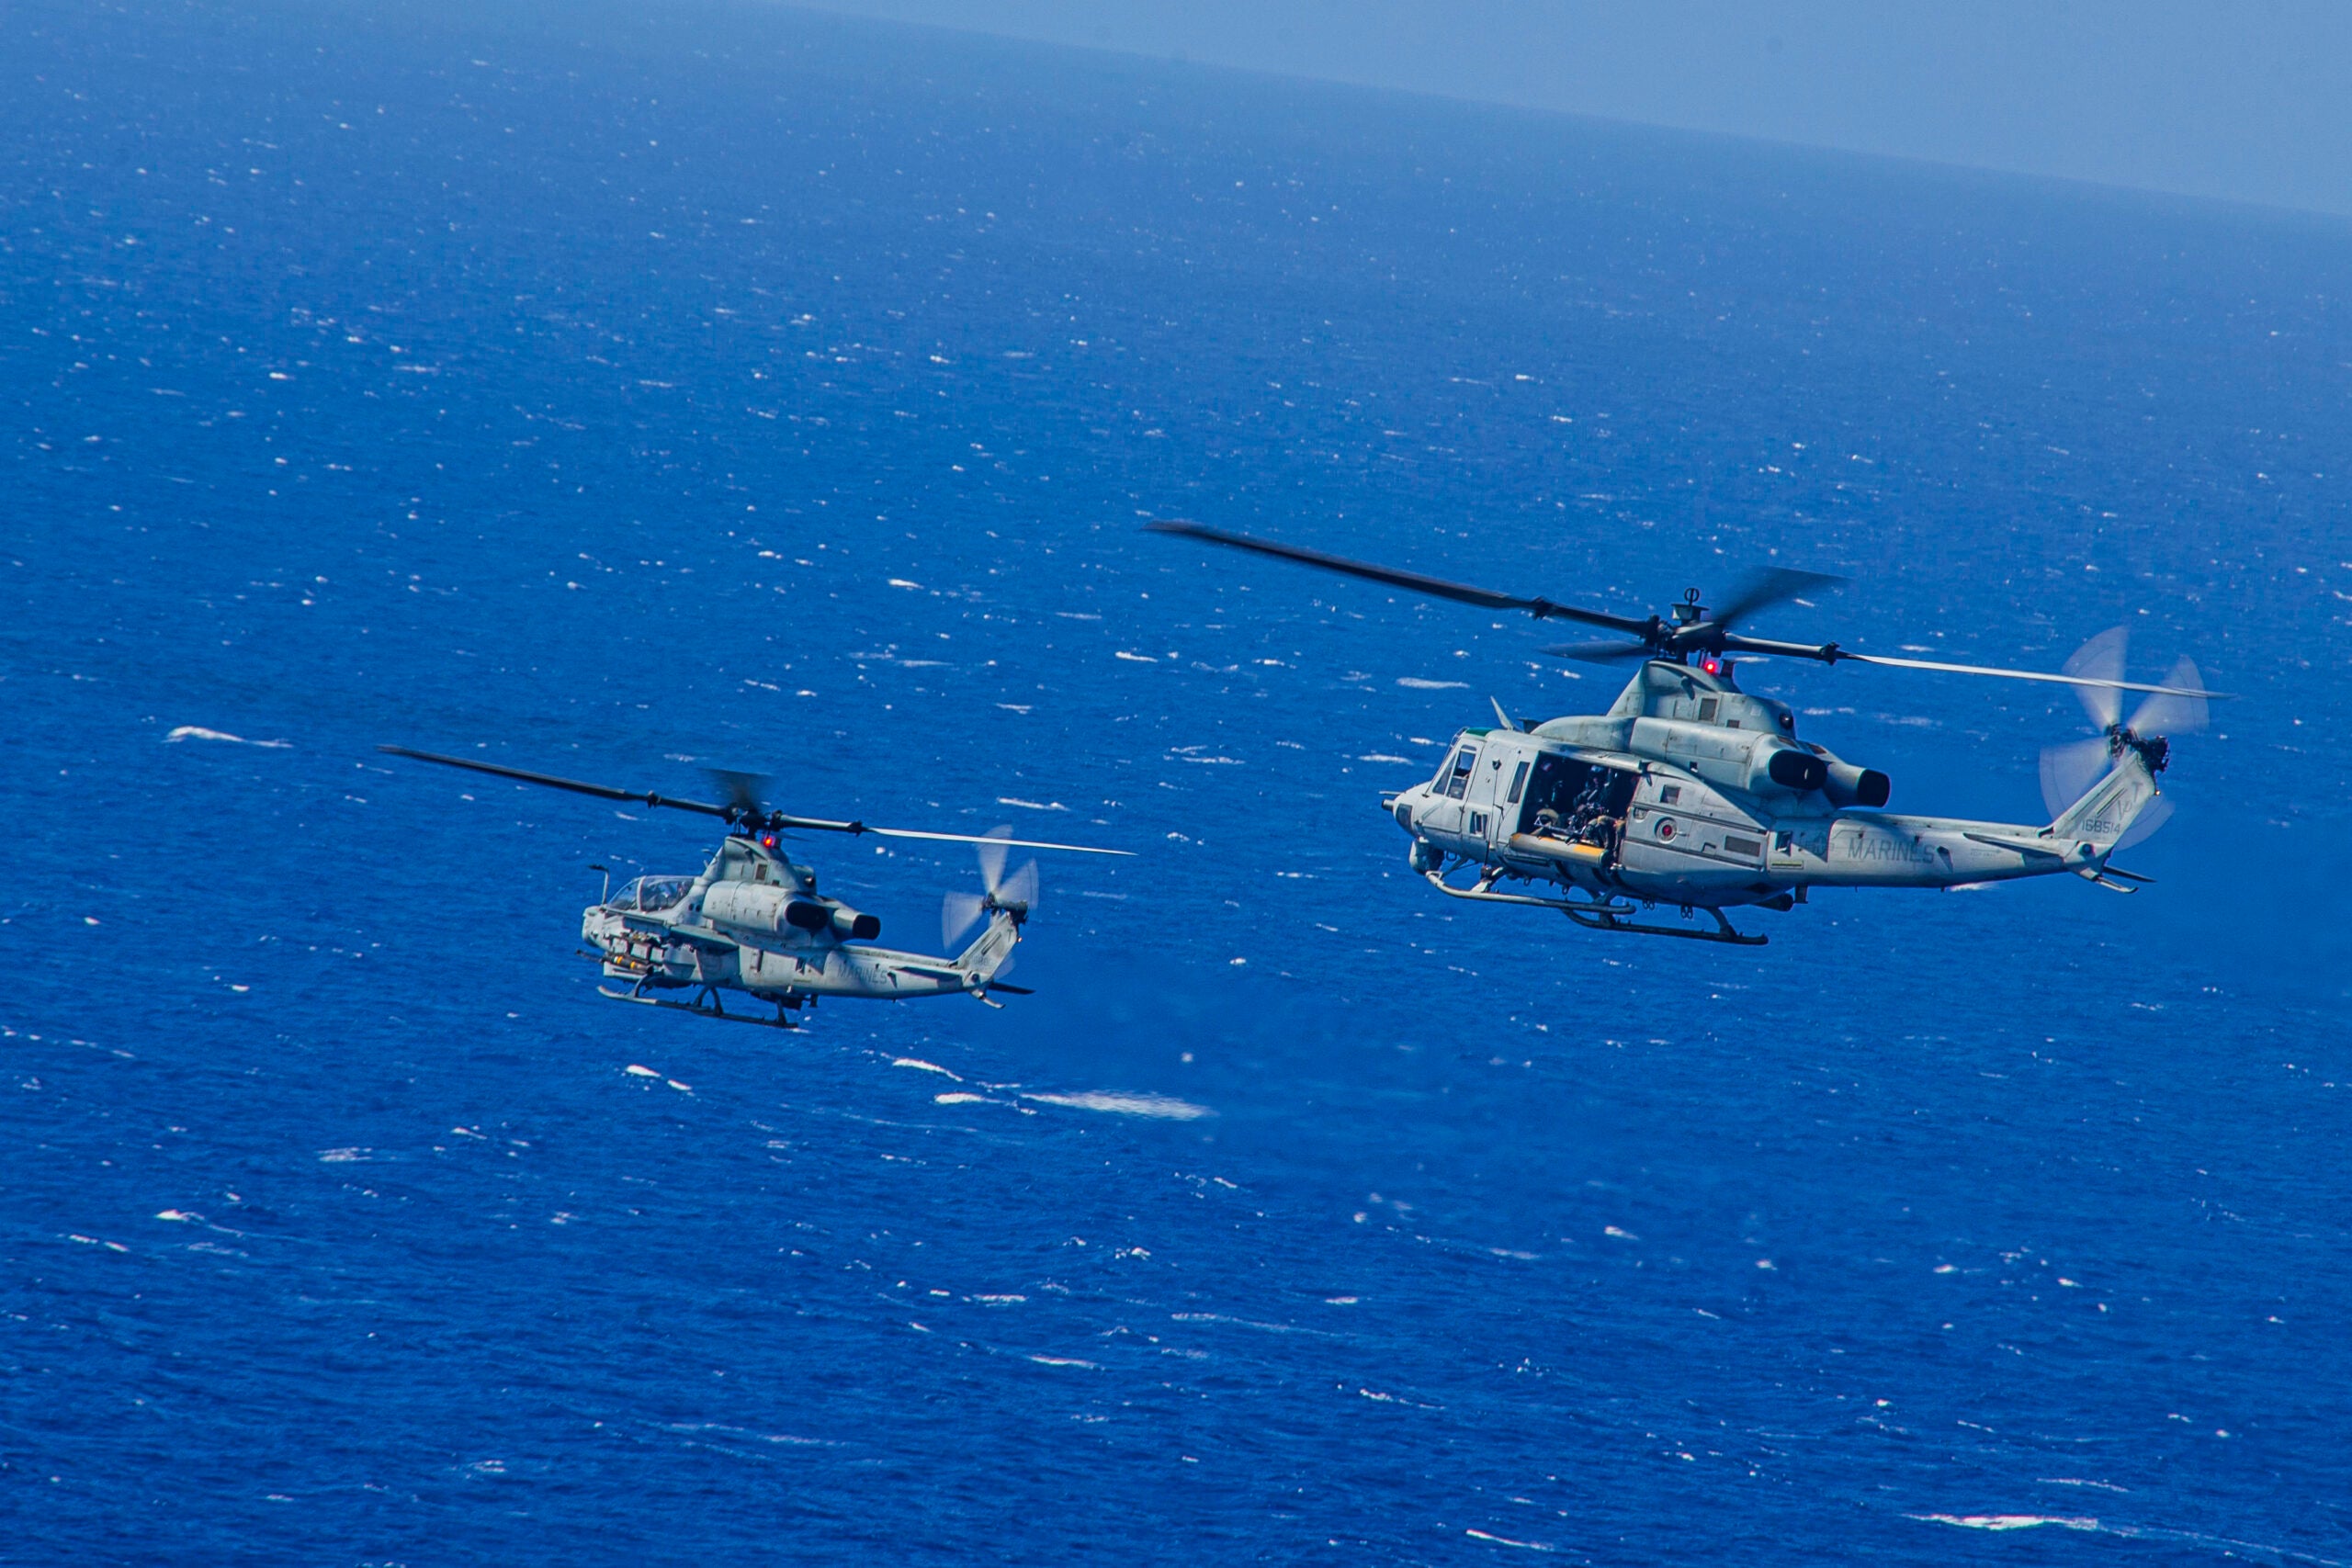 U.S. Marines with Marine Light Helicopter Attack Squadron 367 operate an AH-1Z Viper and UH-1Y Venom during a joint maritime strike exercise with U.S. Navy Helicopter Maritime Strike Squadron 37 over Pacific Missile Range Facility, Hawaii, June 9, 2020. HMLA-367 and HSM-37 conducted the training to exercise sea control and sea denial operations. (U.S. Marine Corps photo by Lance Cpl. Jacob Wilson)